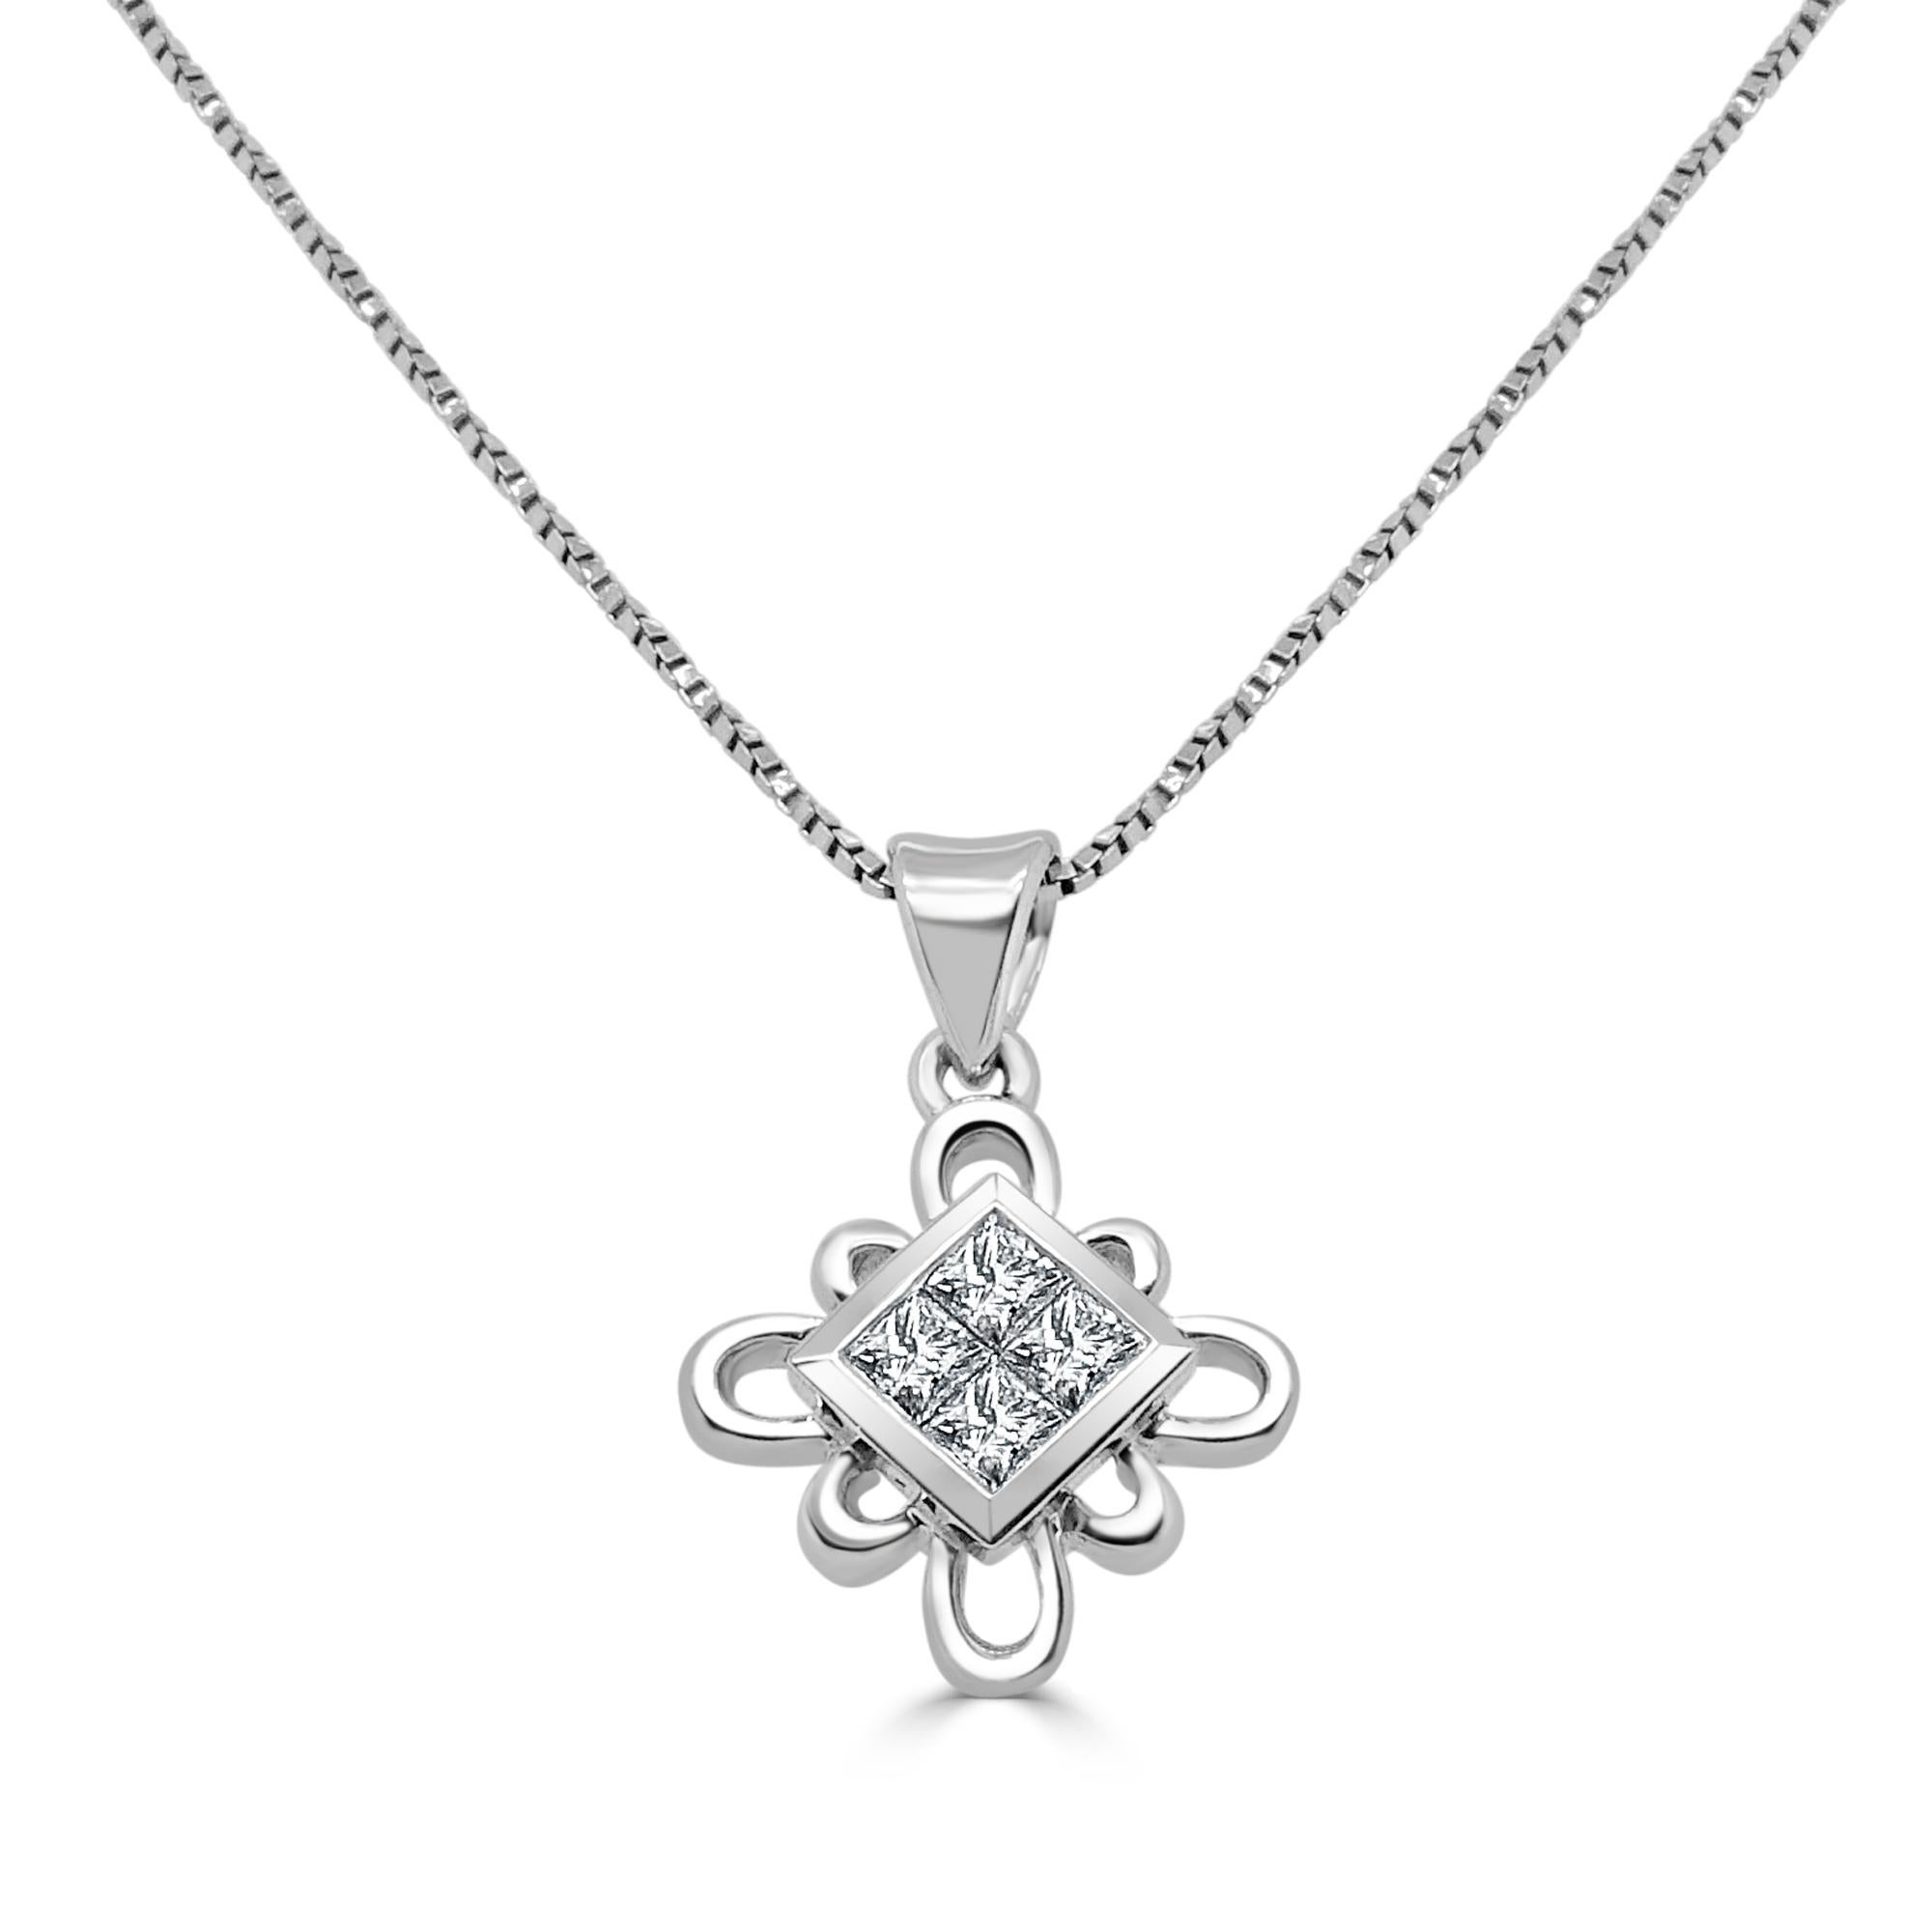 This opulent kite shape diamond pendant adds a spark of eternity to your loved ones style. 18 Karat White Gold Kite Pendant is accented with 0.23 Carats Diamonds (total weight).Gentle and elegant heart shape pendant is crafted in a sleek white gold.